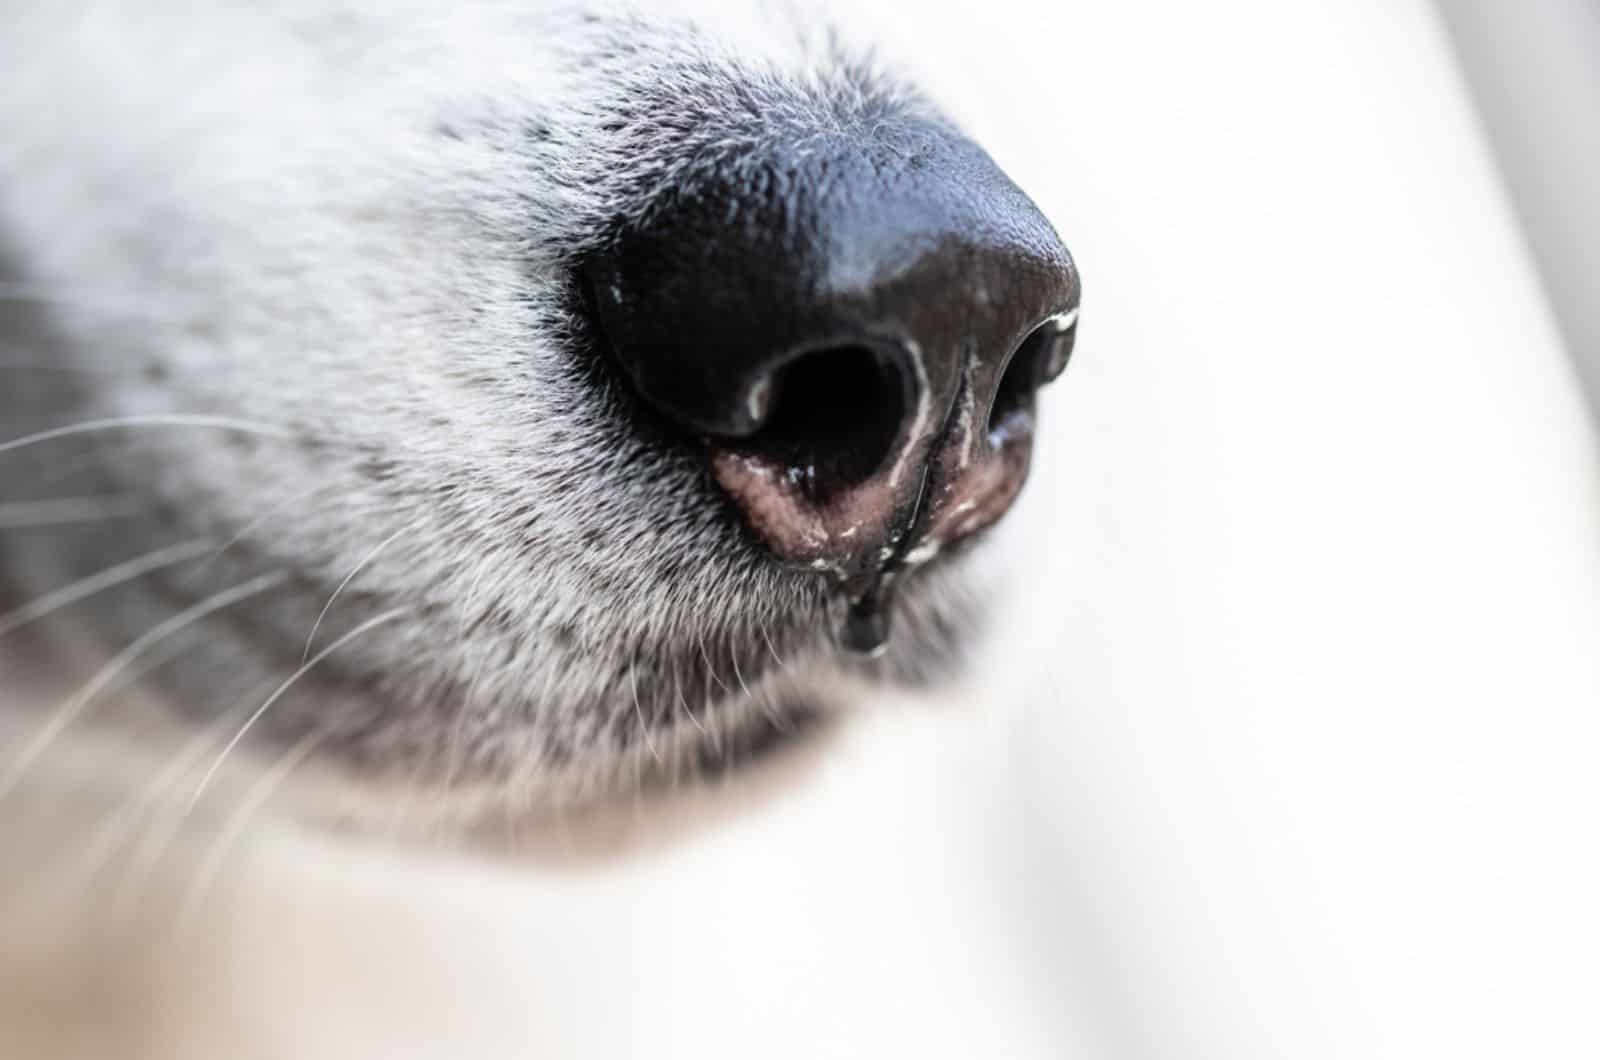 Why Are Dogs Noses Wet? Learn 3 Most Common Reasons